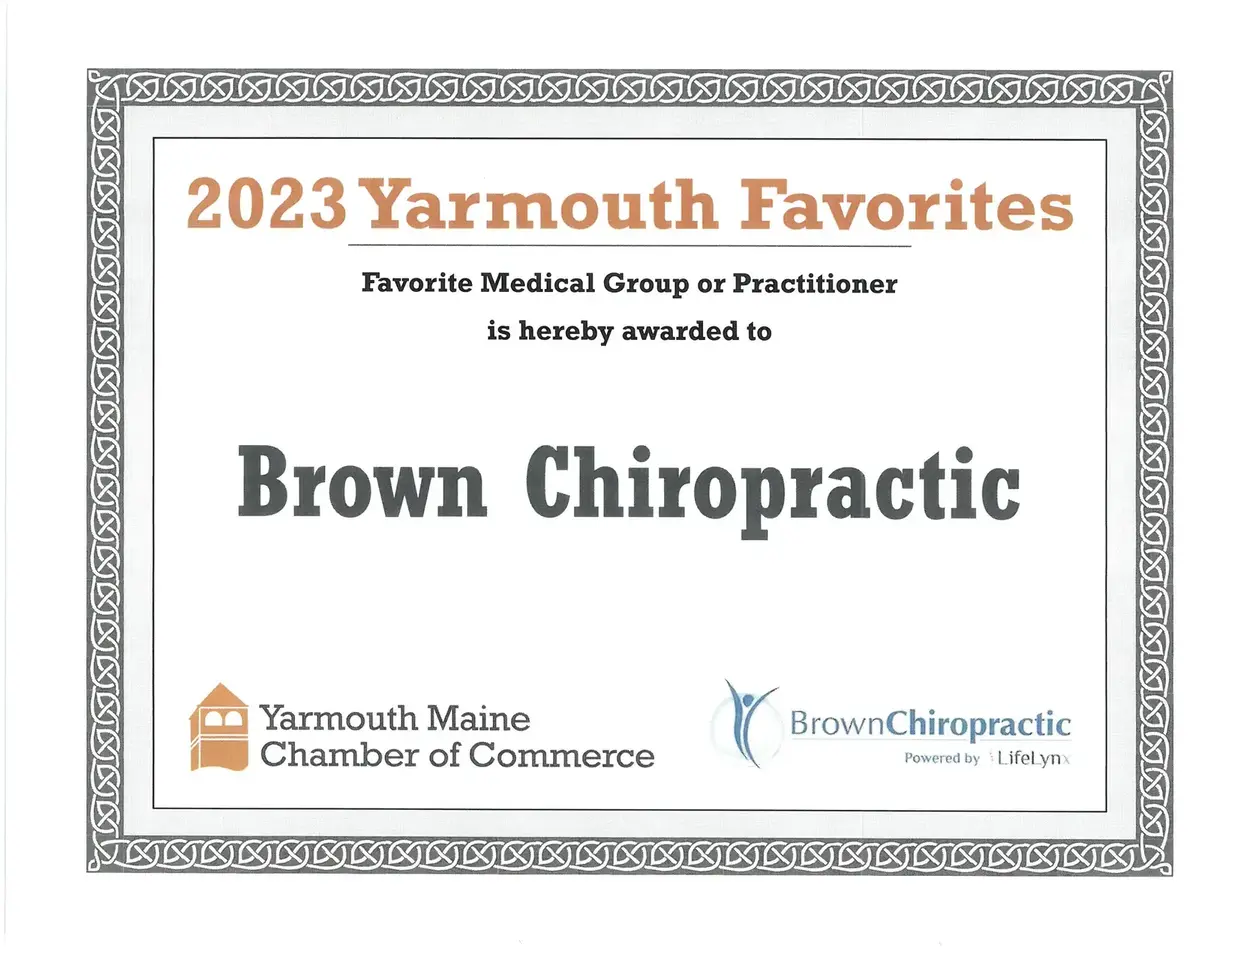 Brown Chiropractic. Best Chiropractor Near Me In Yarmouth, ME.